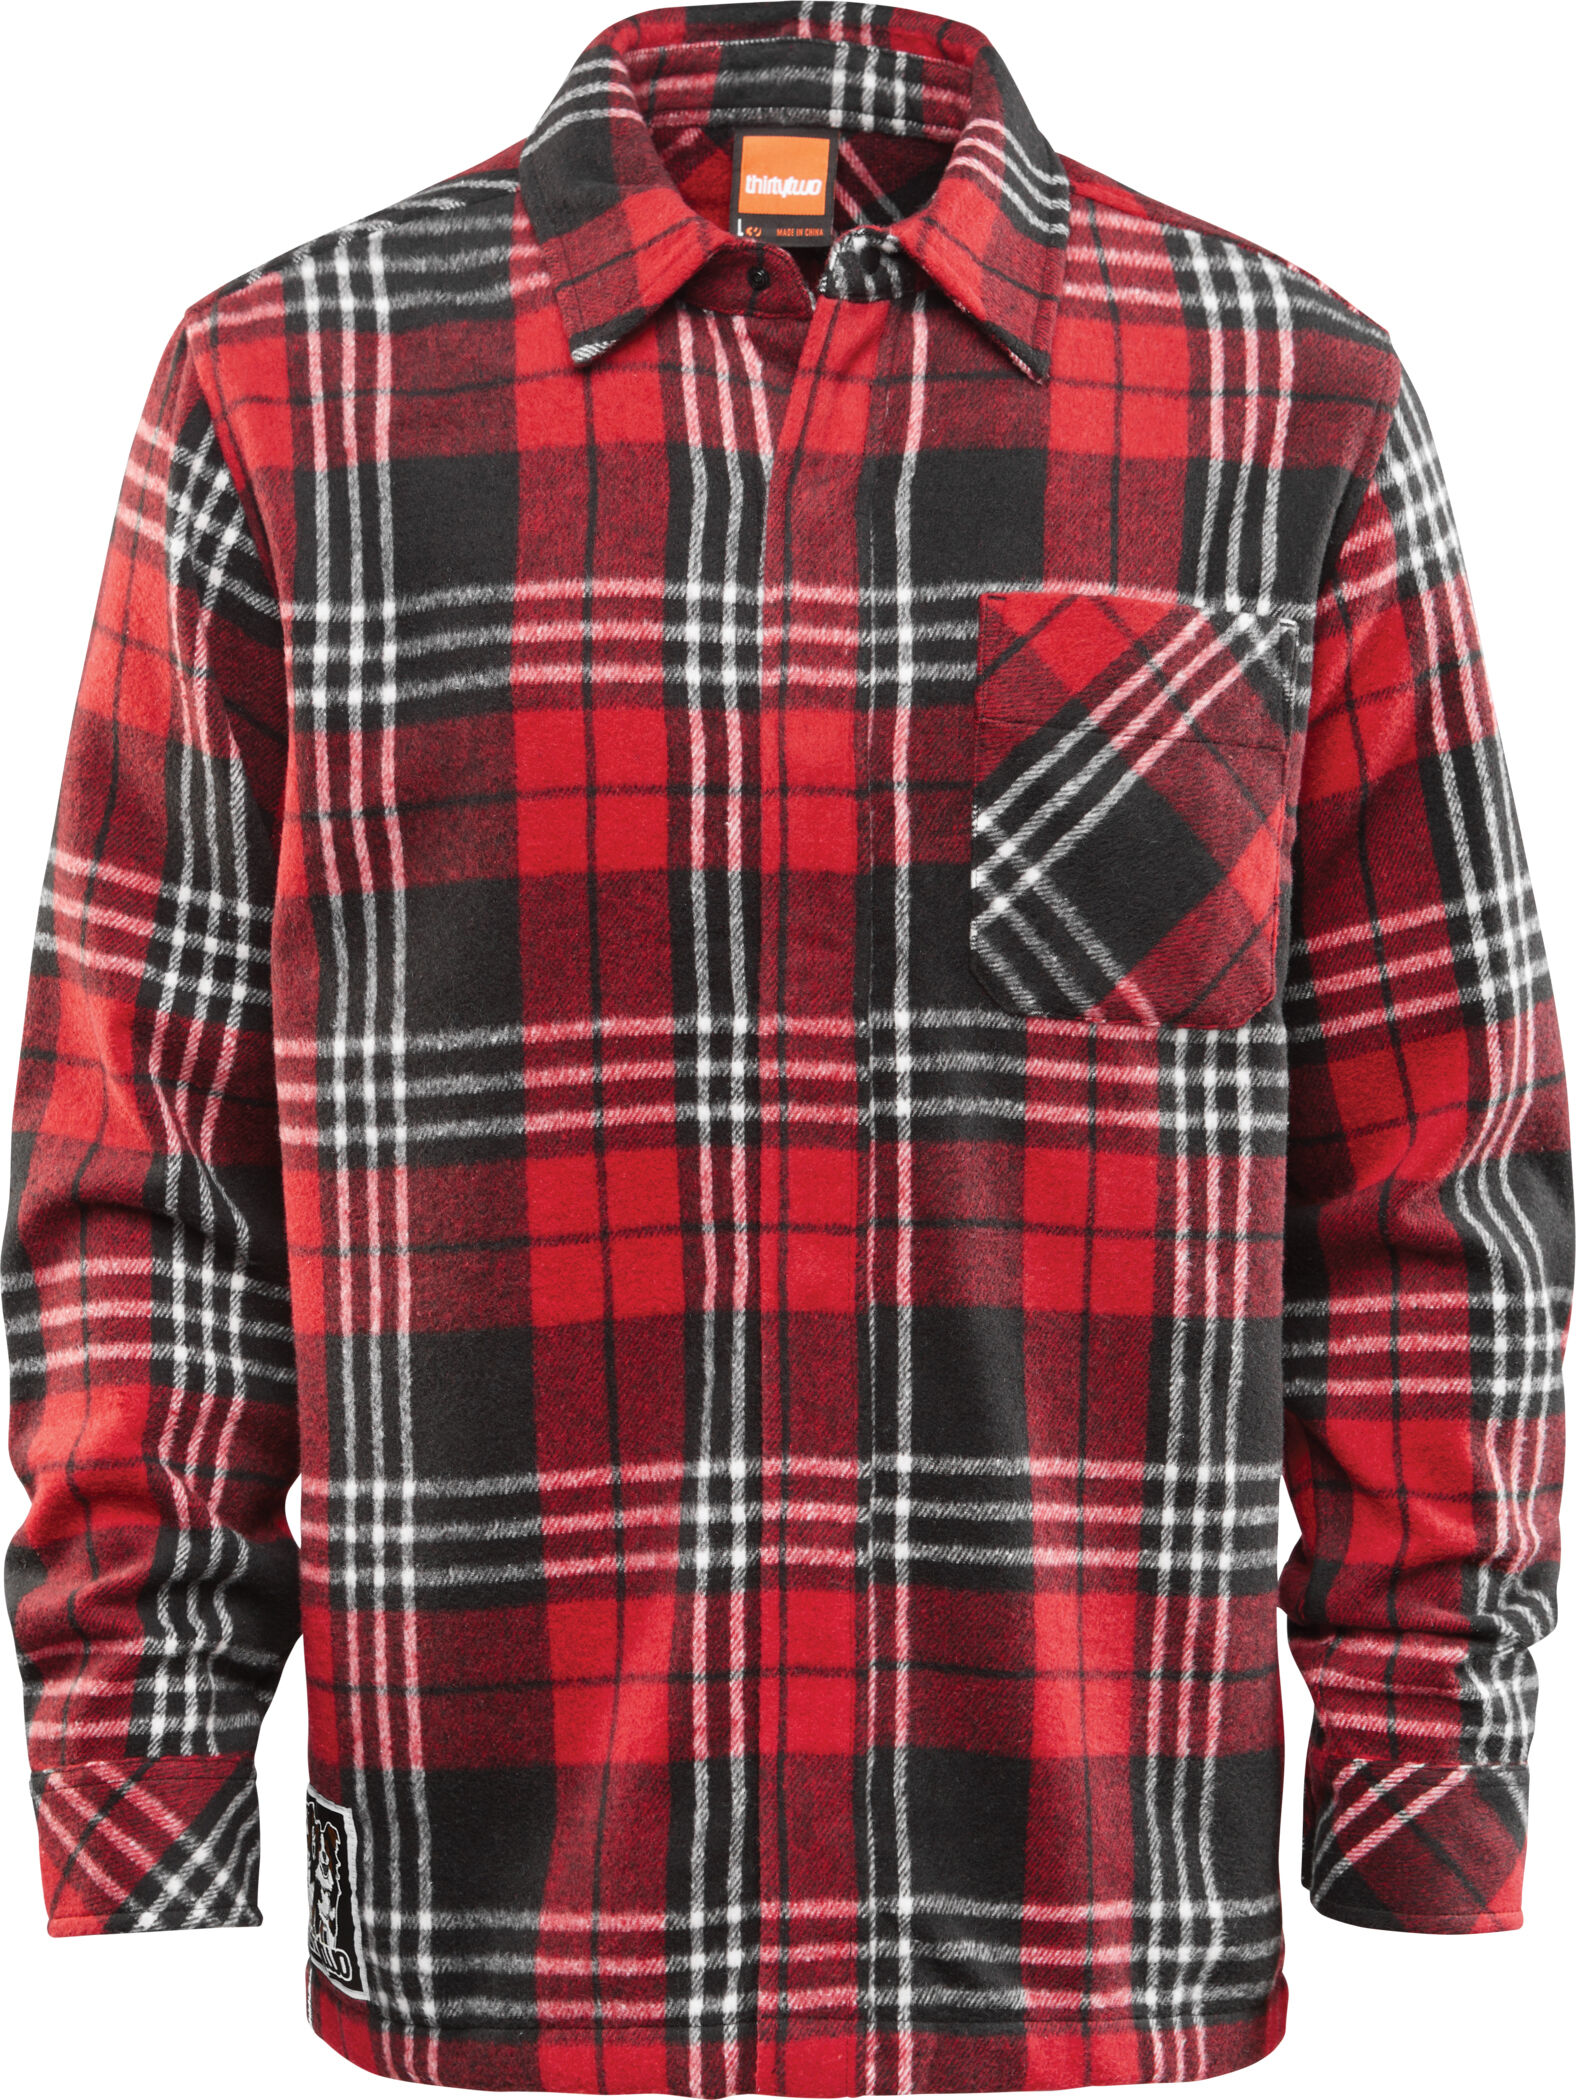 THIRTYTWO 32 FLANNEL SHIRT BLACK RED L